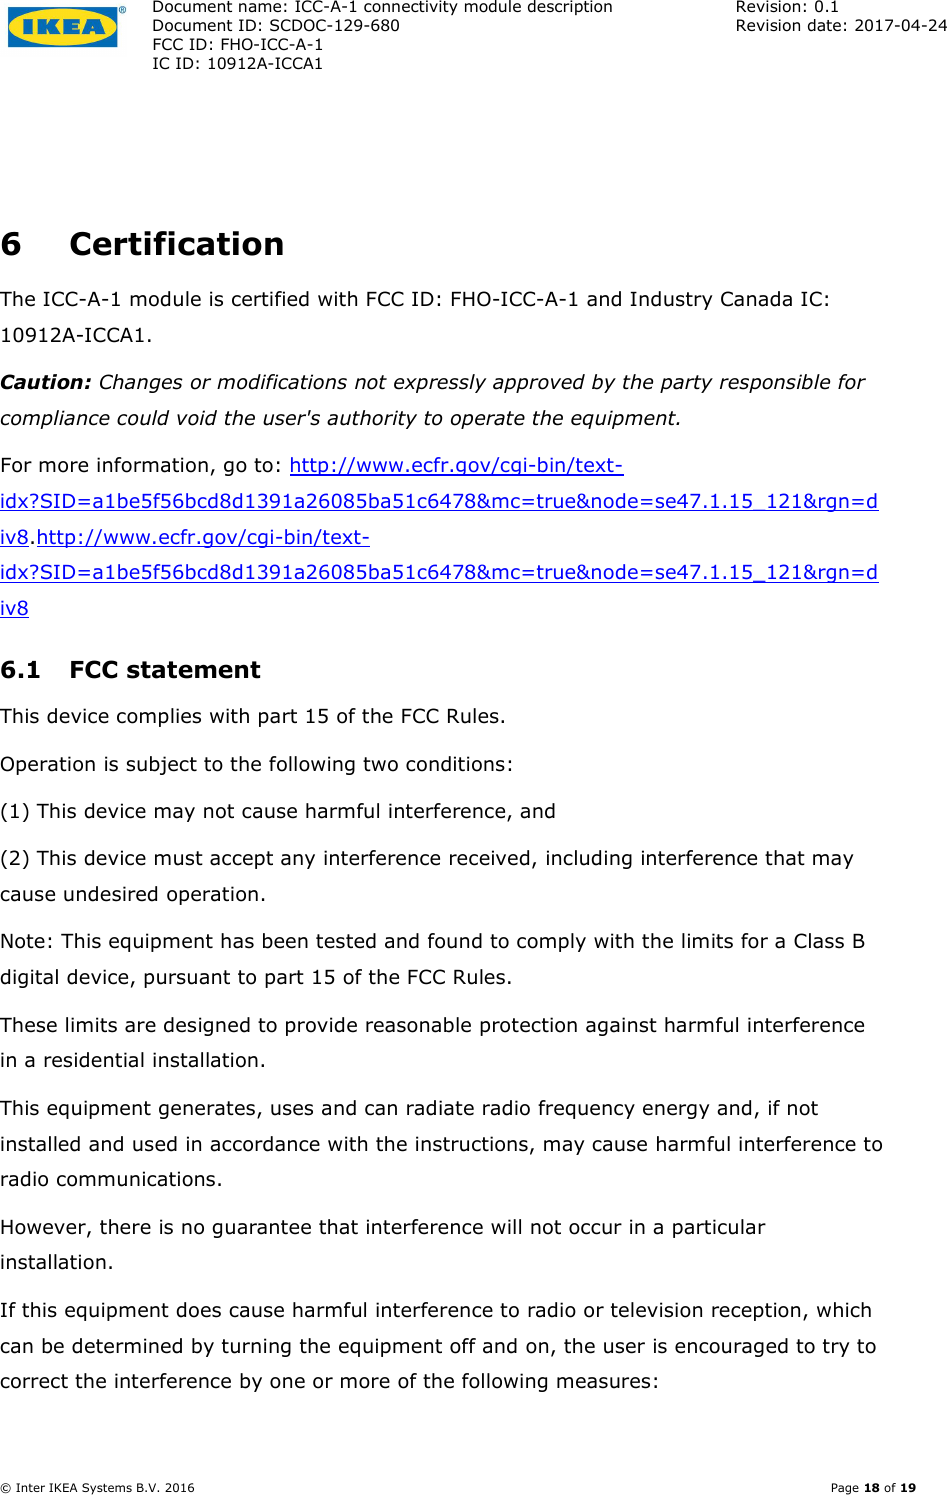 Document name: ICC-A-1 connectivity module description  Revision: 0.1 Document ID: SCDOC-129-680  Revision date: 2017-04-24  FCC ID: FHO-ICC-A-1     IC ID: 10912A-ICCA1       © Inter IKEA Systems B.V. 2016    Page 18 of 19  6 Certification The ICC-A-1 module is certified with FCC ID: FHO-ICC-A-1 and Industry Canada IC: 10912A-ICCA1. Caution: Changes or modifications not expressly approved by the party responsible for compliance could void the user&apos;s authority to operate the equipment. For more information, go to: http://www.ecfr.gov/cgi-bin/text-idx?SID=a1be5f56bcd8d1391a26085ba51c6478&amp;mc=true&amp;node=se47.1.15_121&amp;rgn=div8.http://www.ecfr.gov/cgi-bin/text-idx?SID=a1be5f56bcd8d1391a26085ba51c6478&amp;mc=true&amp;node=se47.1.15_121&amp;rgn=div8 6.1 FCC statement This device complies with part 15 of the FCC Rules. Operation is subject to the following two conditions: (1) This device may not cause harmful interference, and (2) This device must accept any interference received, including interference that may cause undesired operation. Note: This equipment has been tested and found to comply with the limits for a Class B digital device, pursuant to part 15 of the FCC Rules. These limits are designed to provide reasonable protection against harmful interference in a residential installation. This equipment generates, uses and can radiate radio frequency energy and, if not installed and used in accordance with the instructions, may cause harmful interference to radio communications. However, there is no guarantee that interference will not occur in a particular installation. If this equipment does cause harmful interference to radio or television reception, which can be determined by turning the equipment off and on, the user is encouraged to try to correct the interference by one or more of the following measures: 